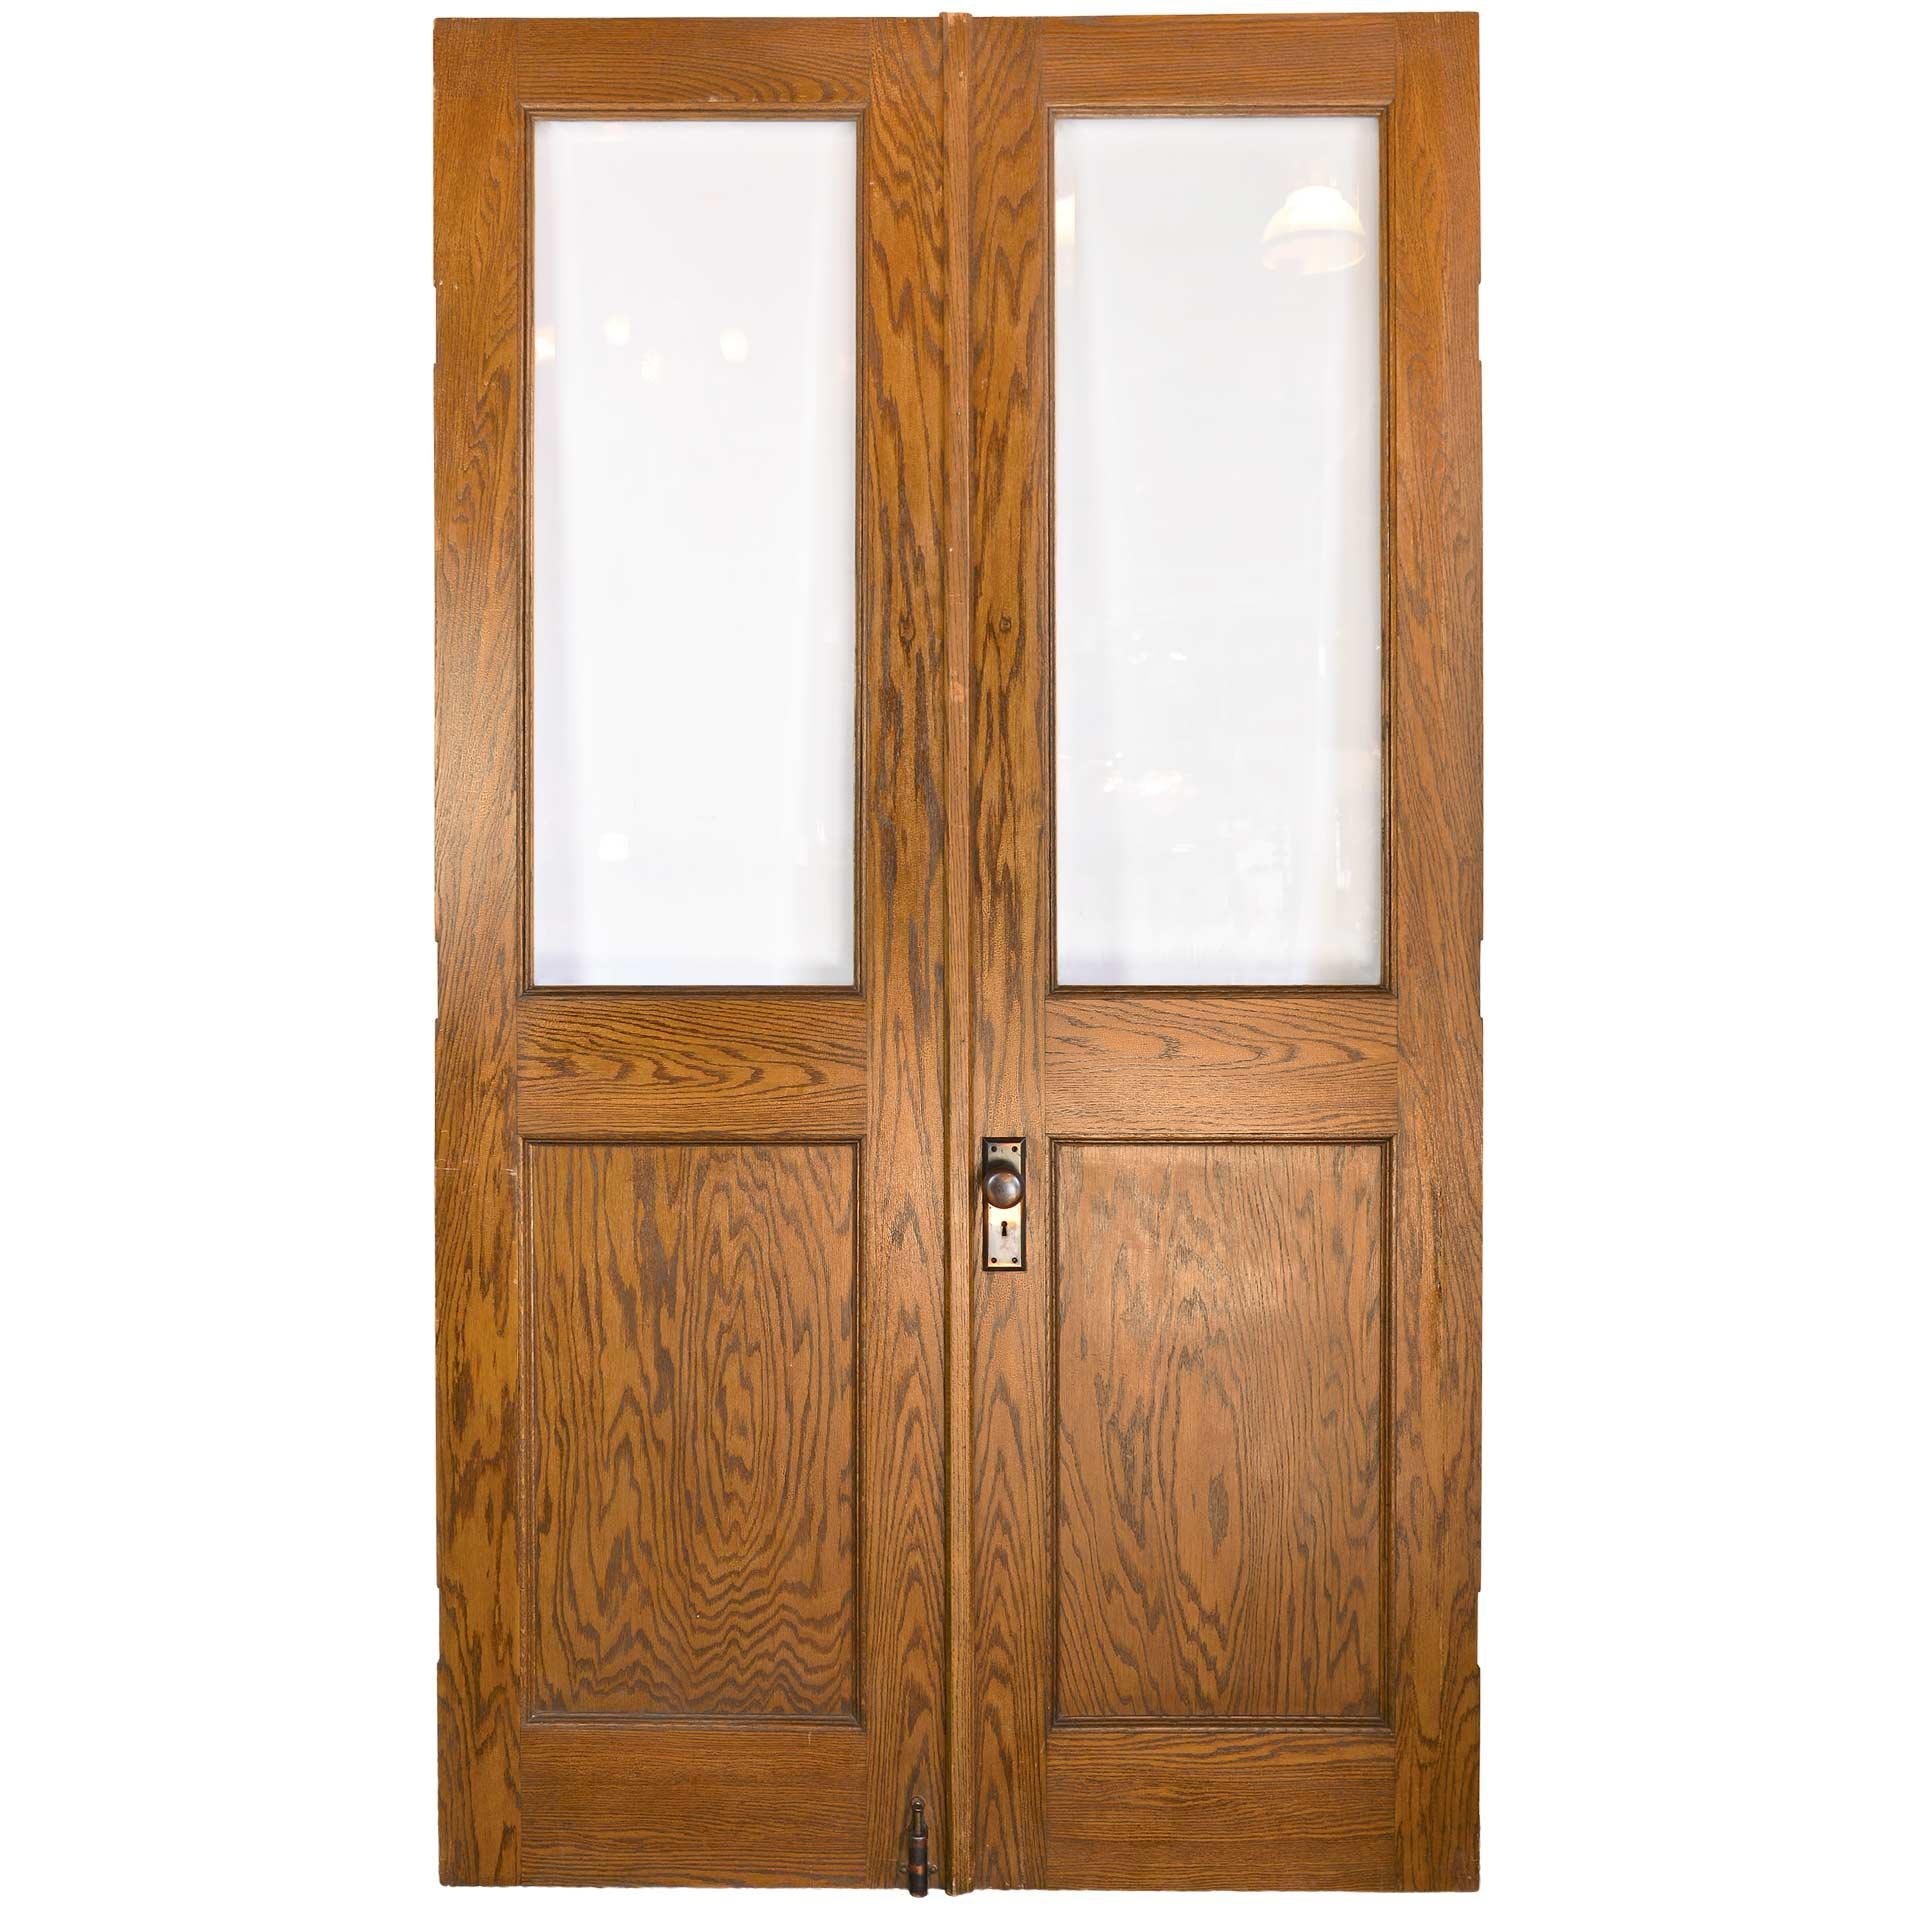 Tall Oak Double Doors with Beveled Glass Windows